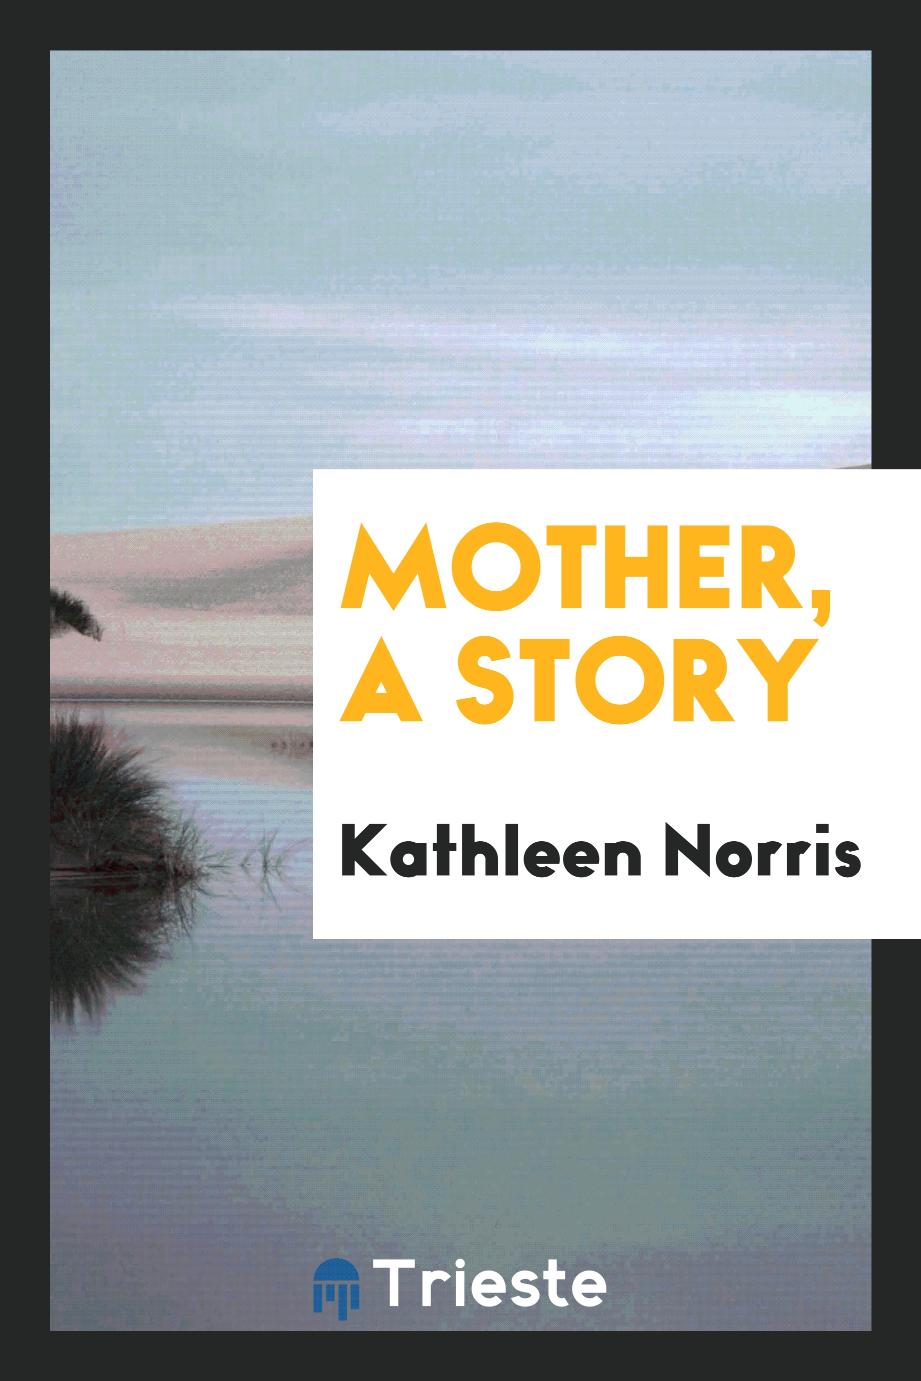 Mother, a story